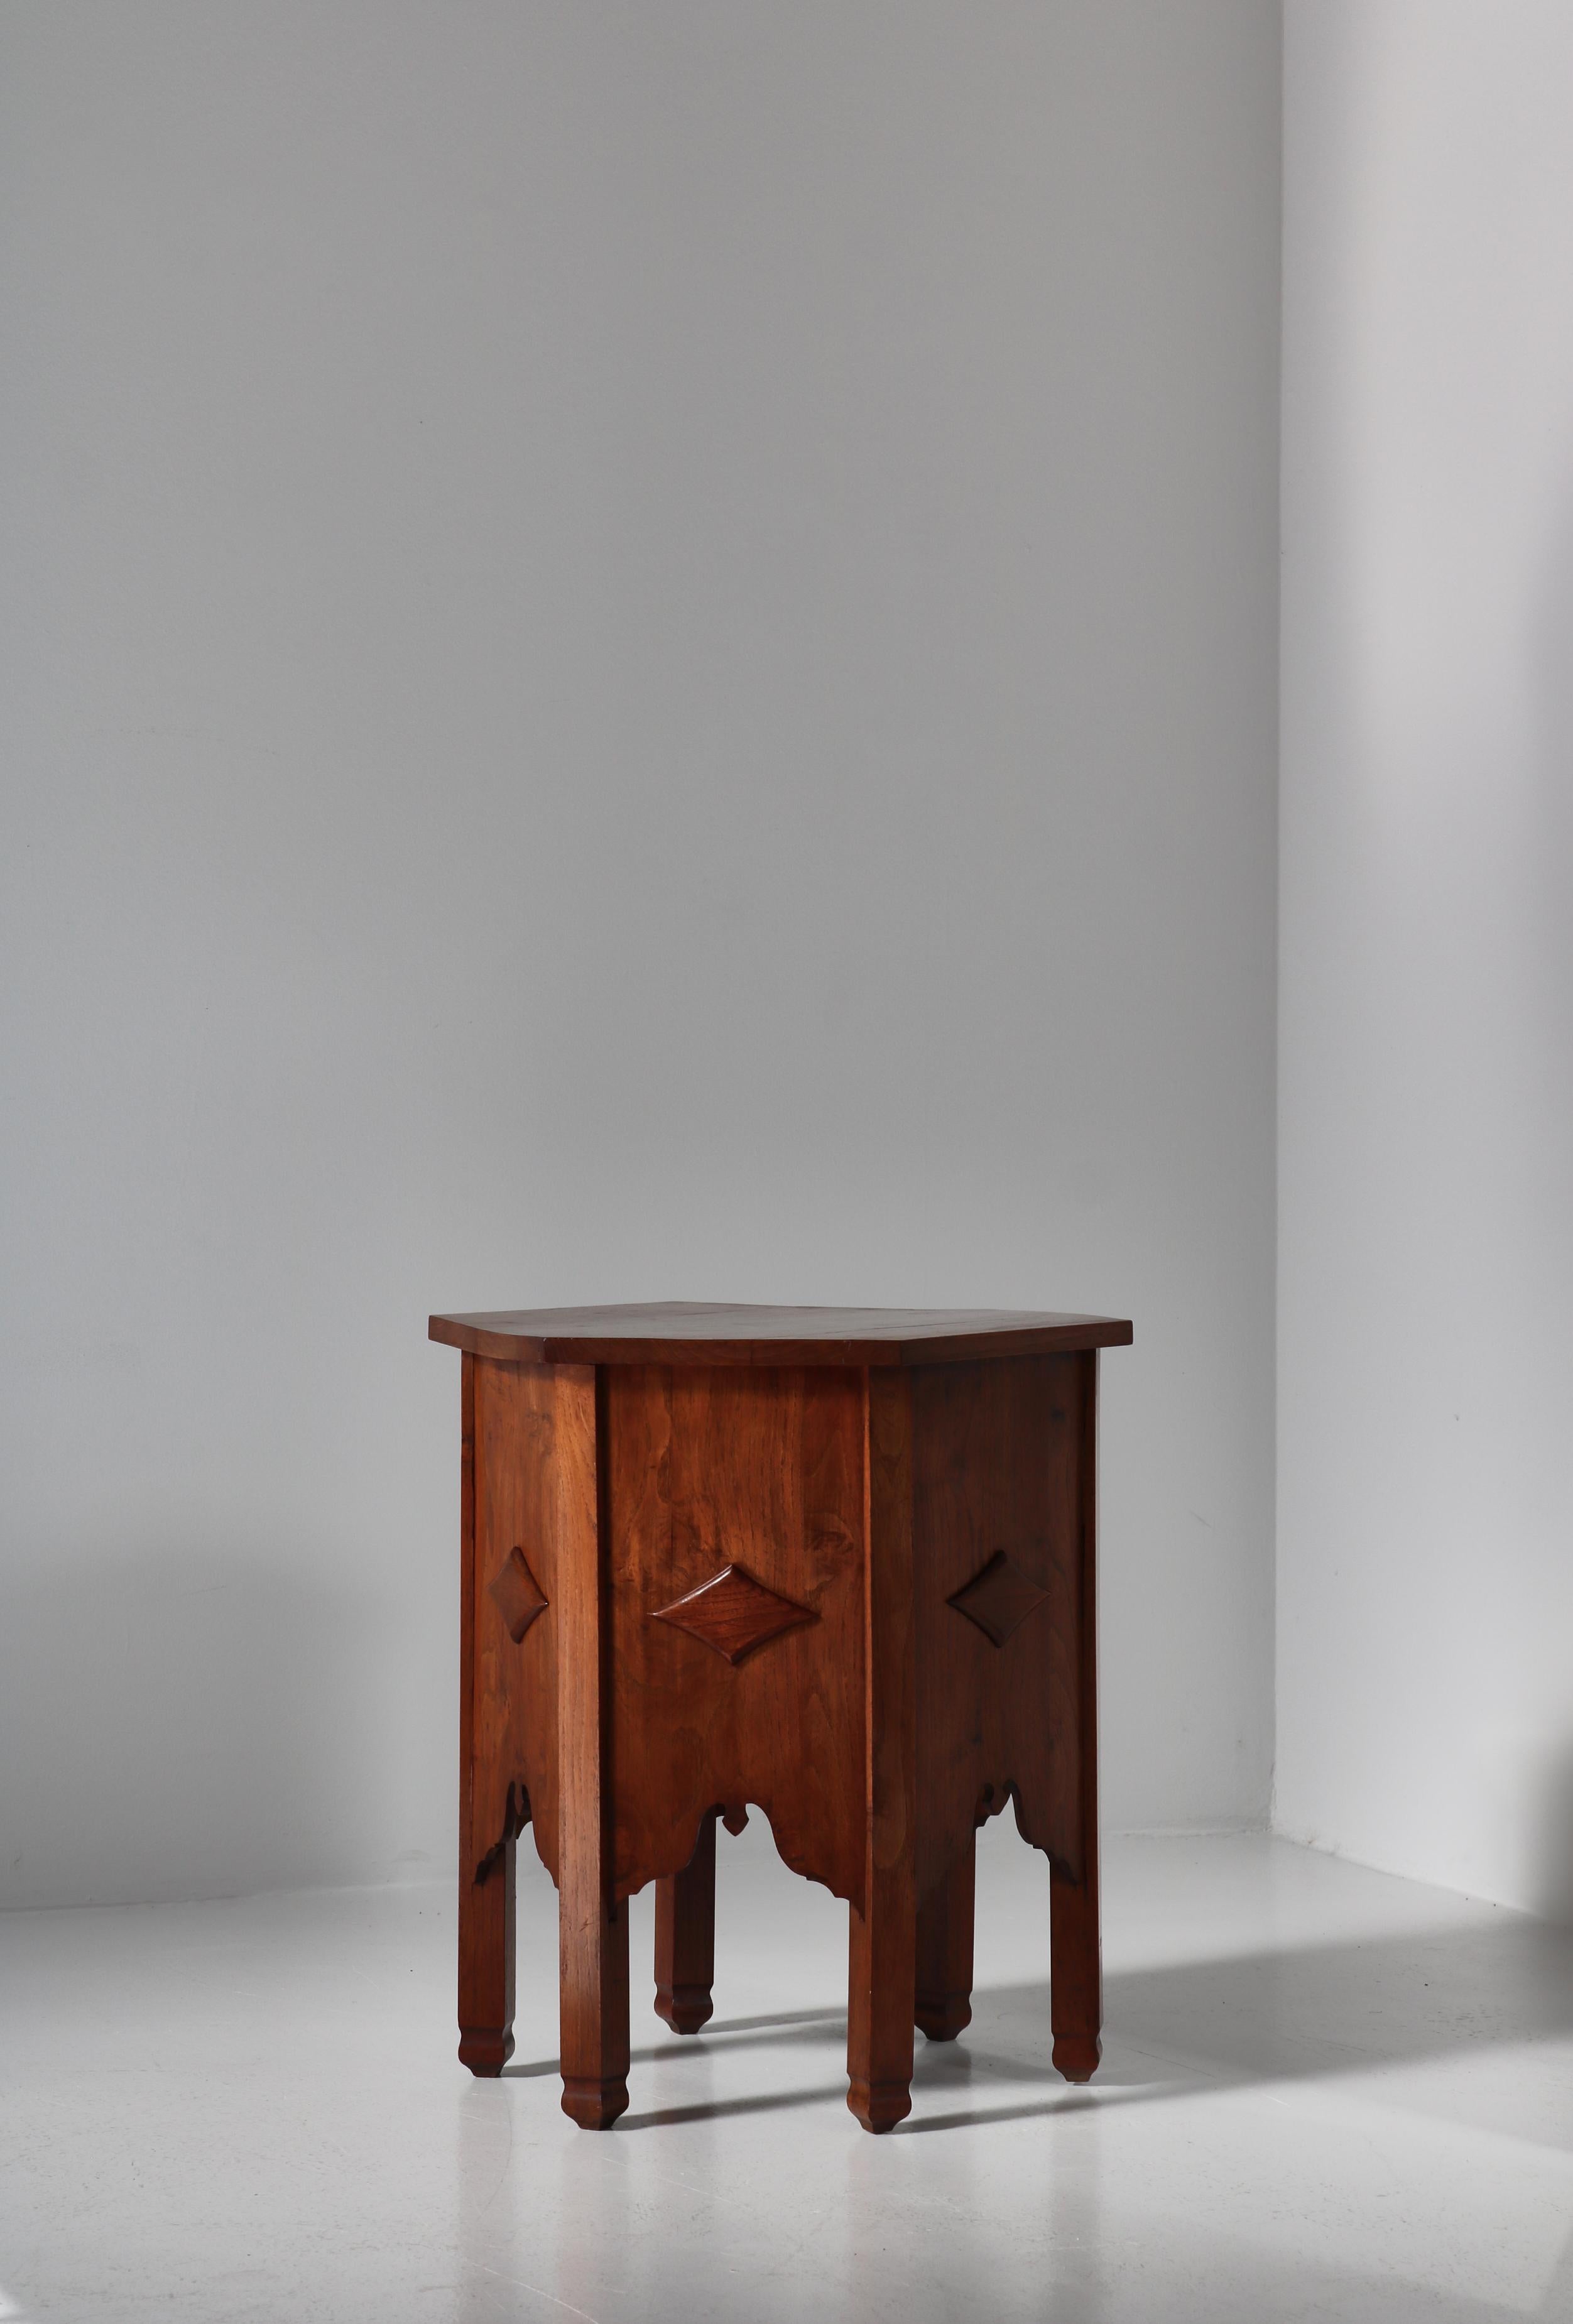 Art Nouveau Hexagonal Side Table by Danish Cabinetmaker, Carved Elm Tree, 1930s For Sale 7